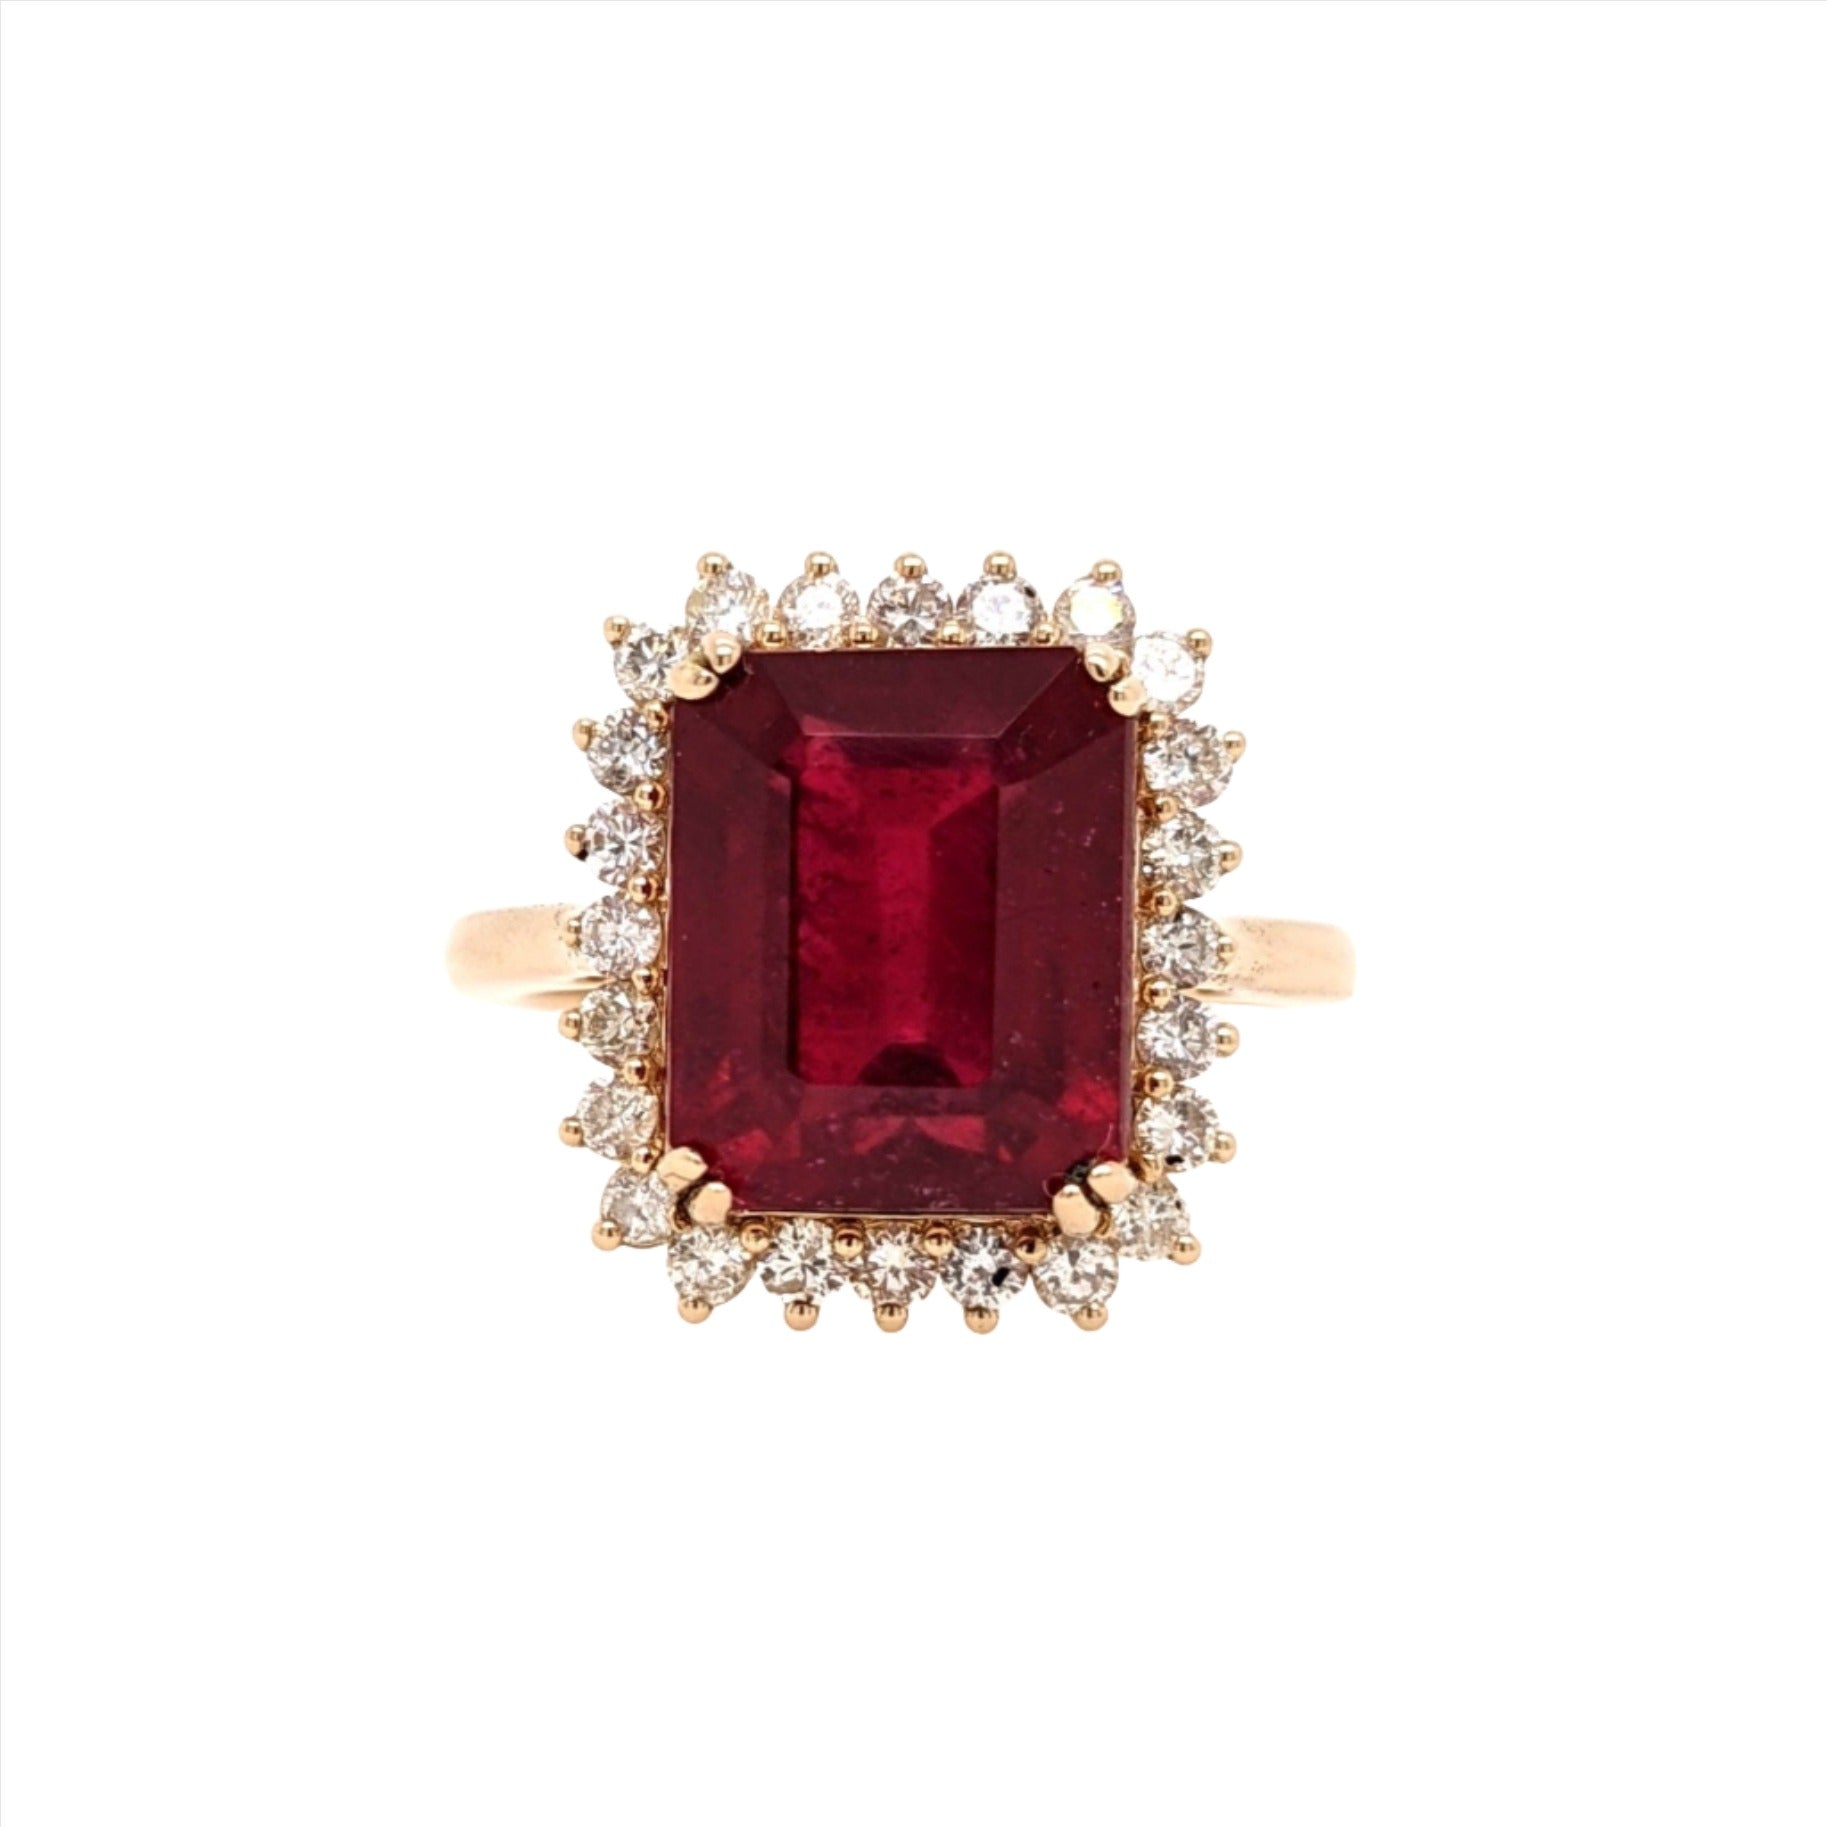 8 carat Ruby Ring w an Earth Mined Diamond Halo | Solid 14K Yellow Gold | Emerald Cut 11x9mm | Pigeon Blood | Red Gemstone | July Birthstone